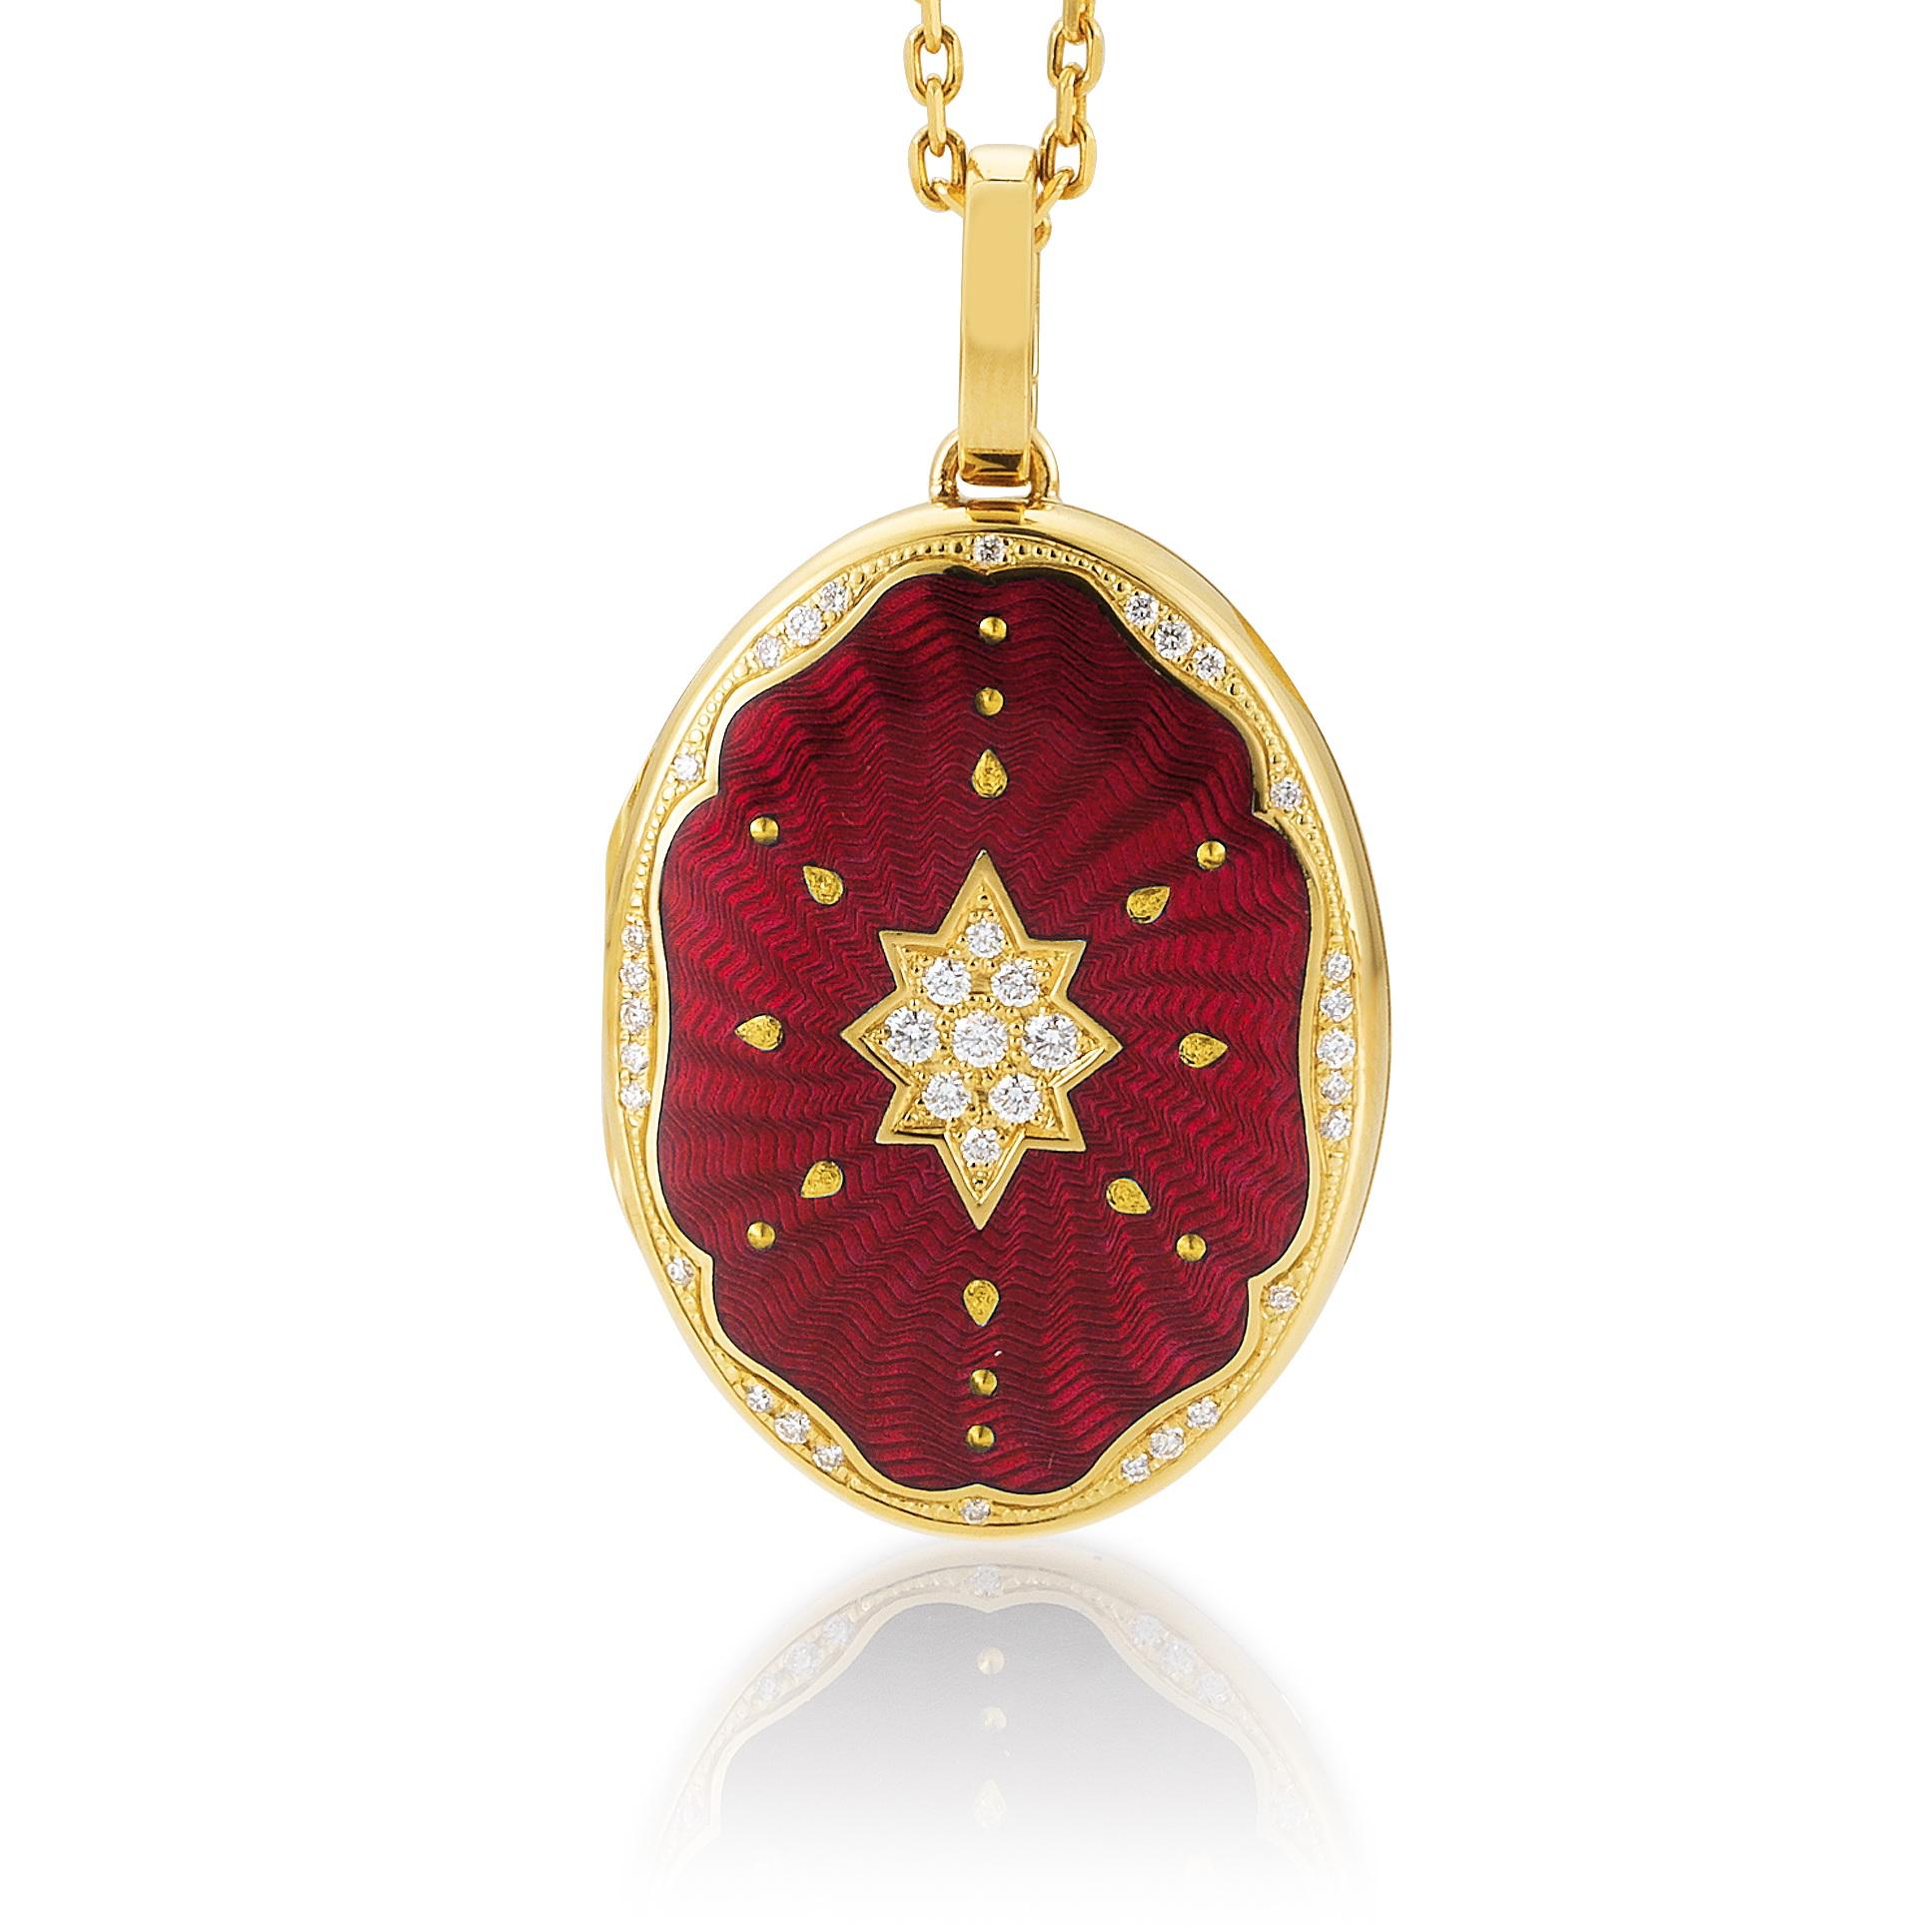 Victor Mayer oval locket pendant 18k yellow gold, Victoria collection, translucent red vitreous enamel, gold paillons, 37 diamonds, total 0.29 ct, G VS, brilliant cut, measurements app. 25 mm x 35 mm

About the creator Victor Mayer
Victor Mayer is